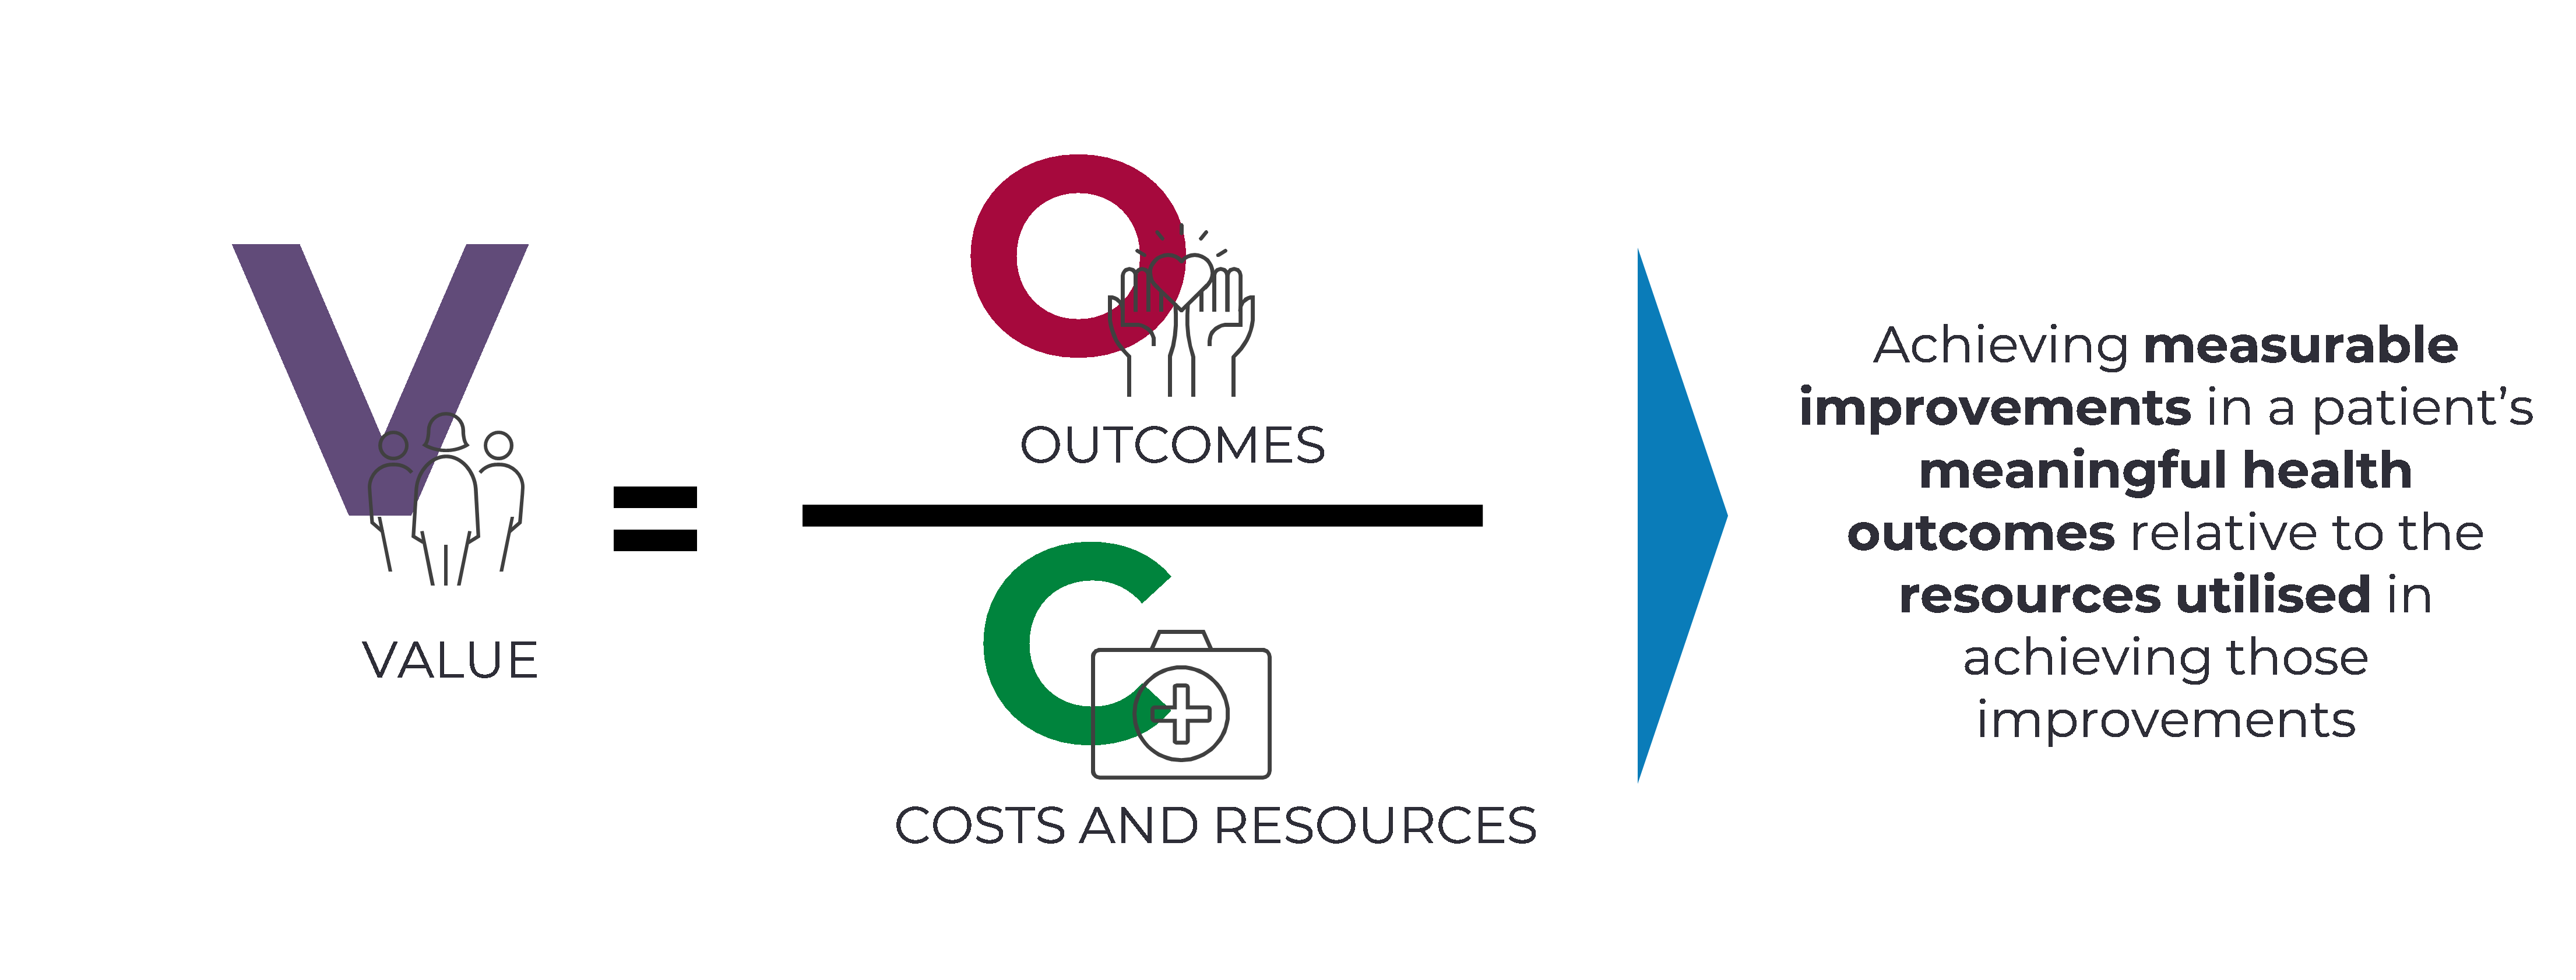 Equation showing value equals outcomes over costs and resources, in other words, achieving measurable improvements in a patient’s meaningful health outcomes relative to the resources utilised in achieving those improvements.